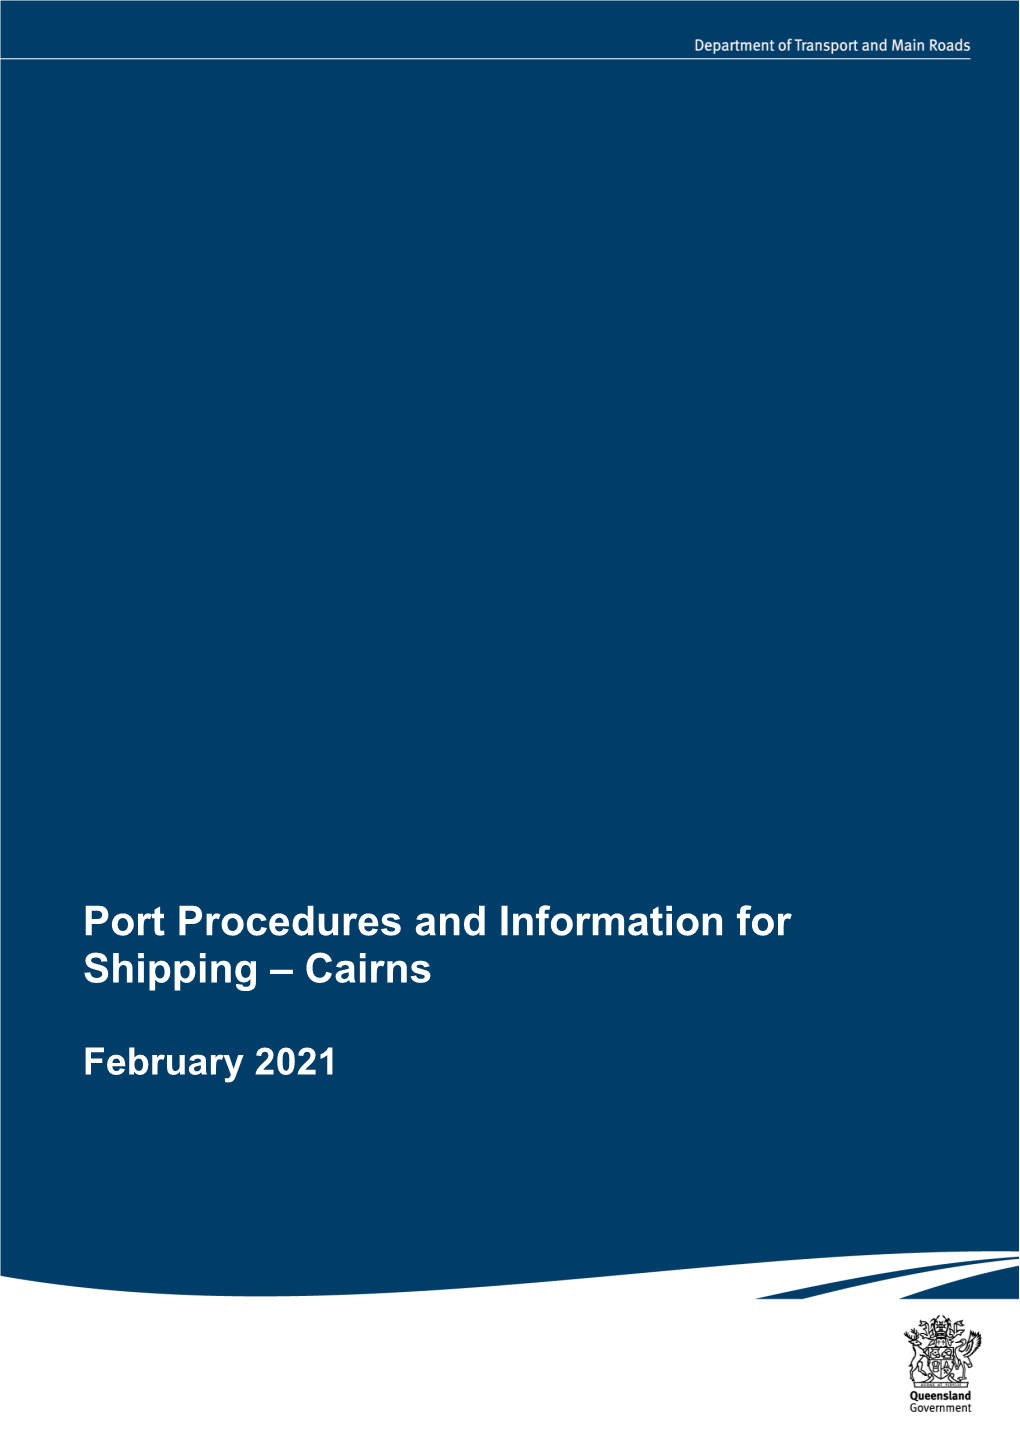 Port Procedures and Information for Shipping – Cairns